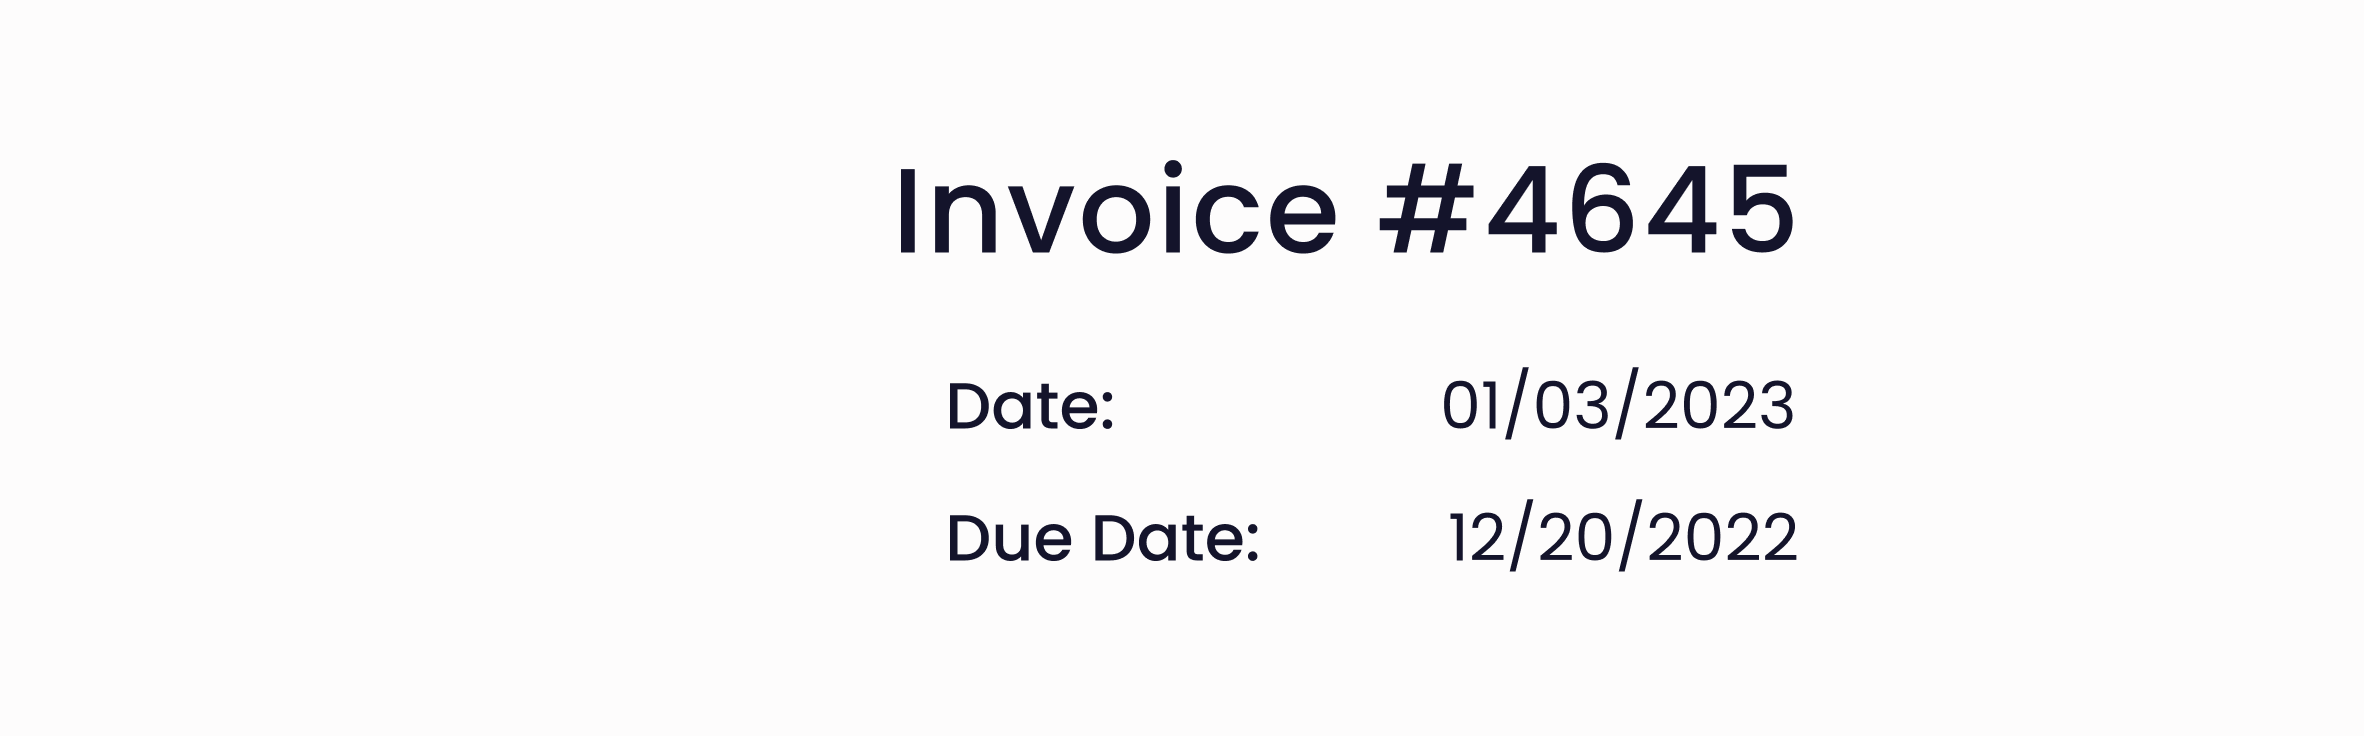 Invoice date and number